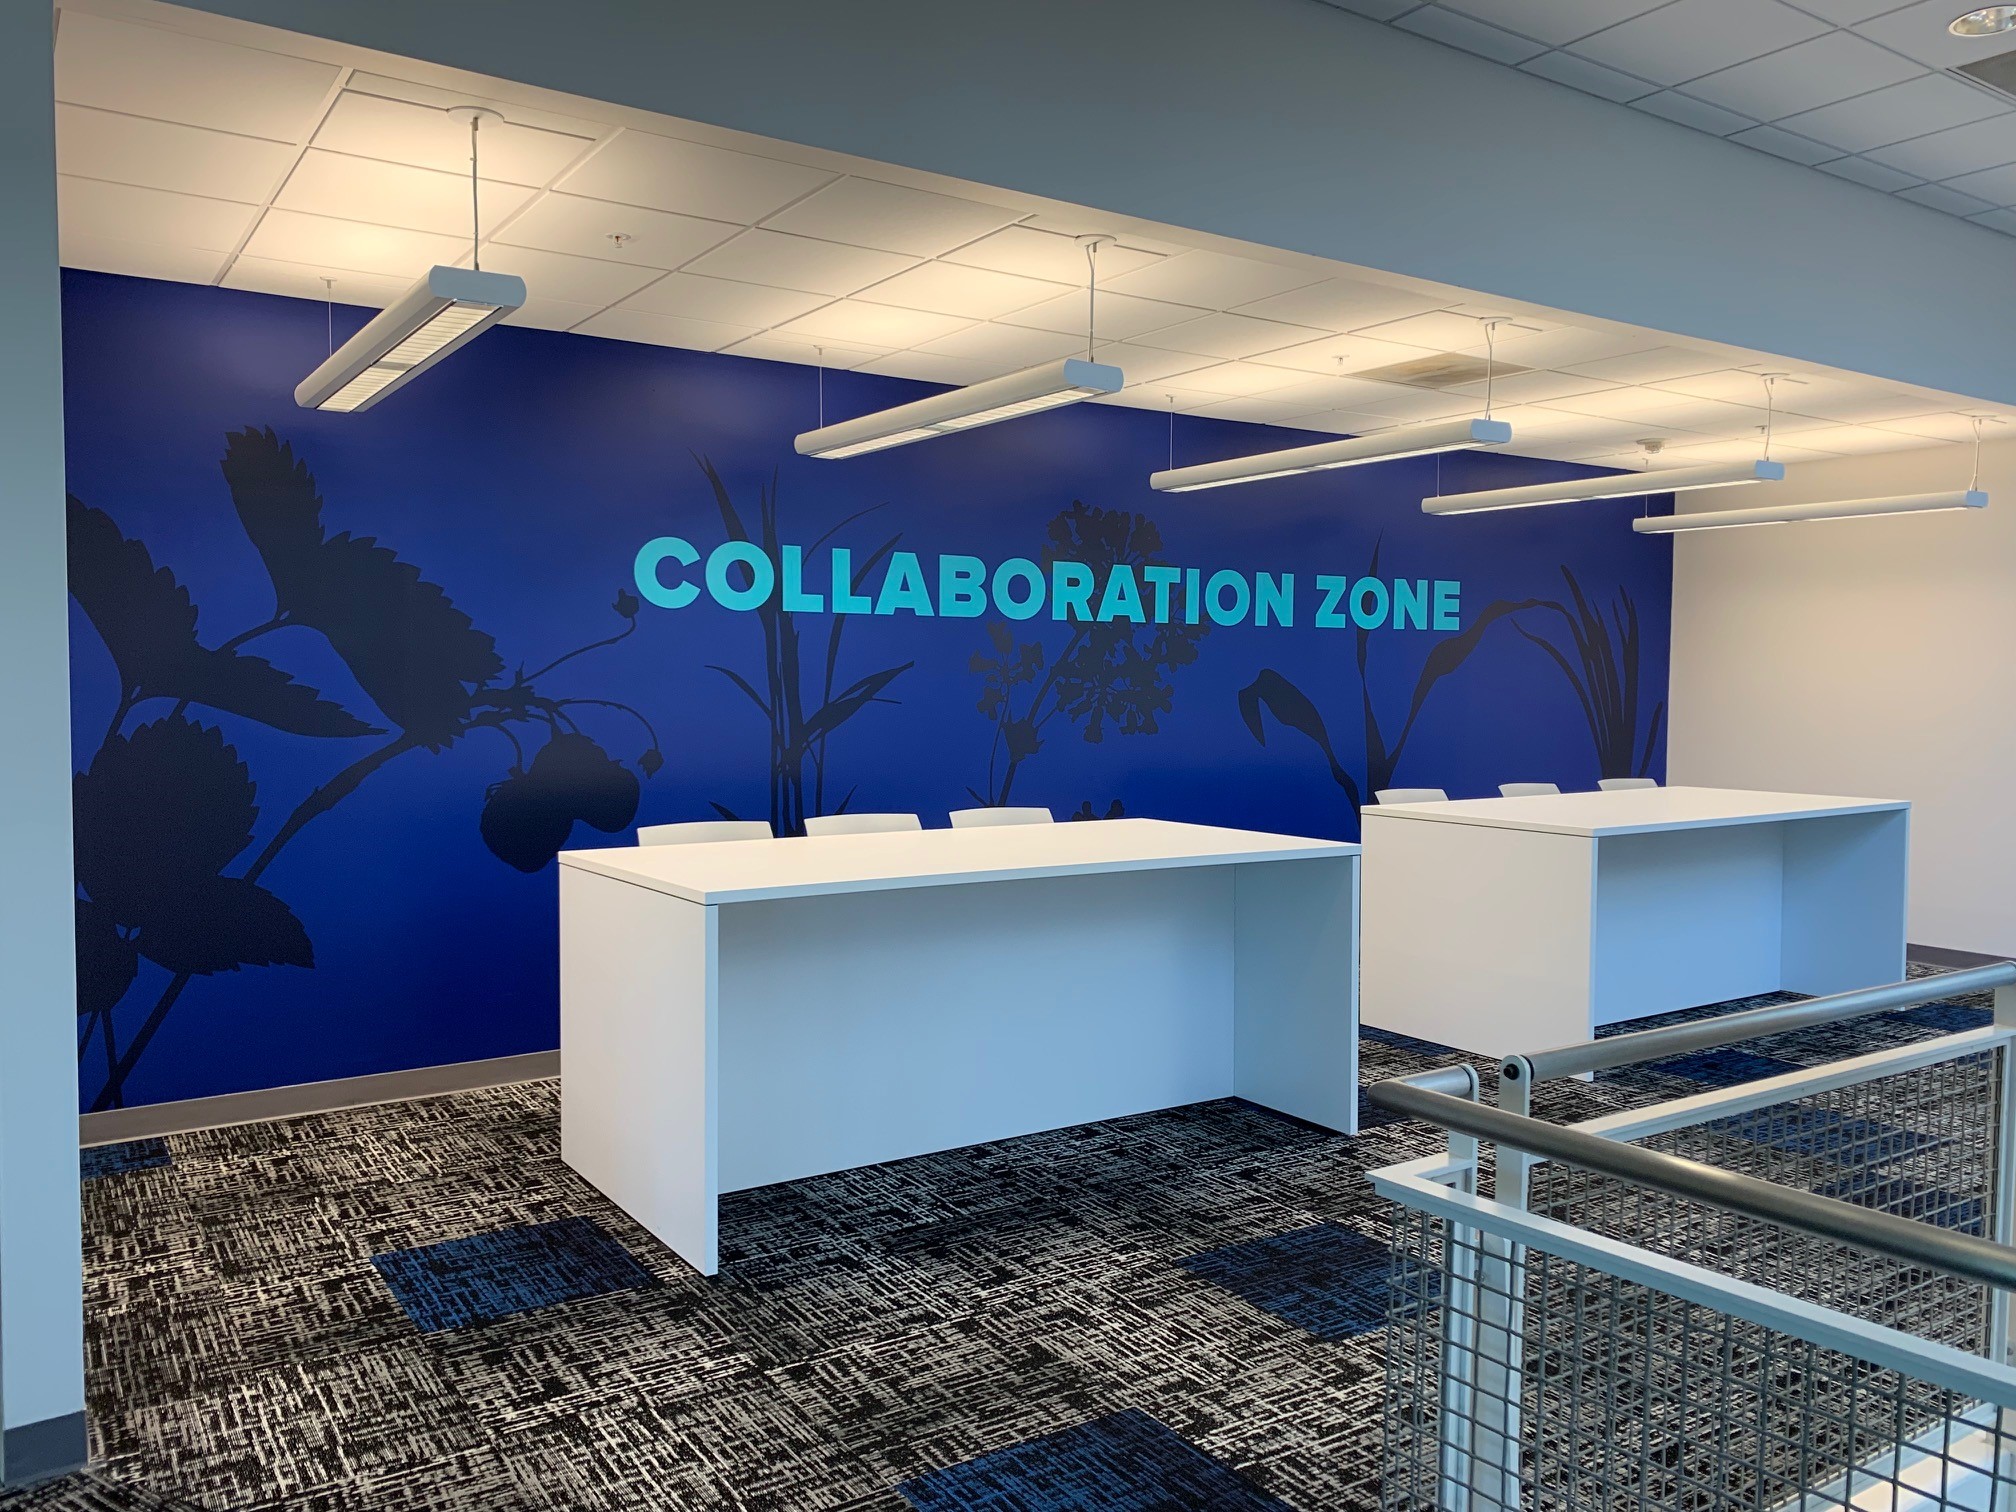 Collaboration Zone Wall Decal